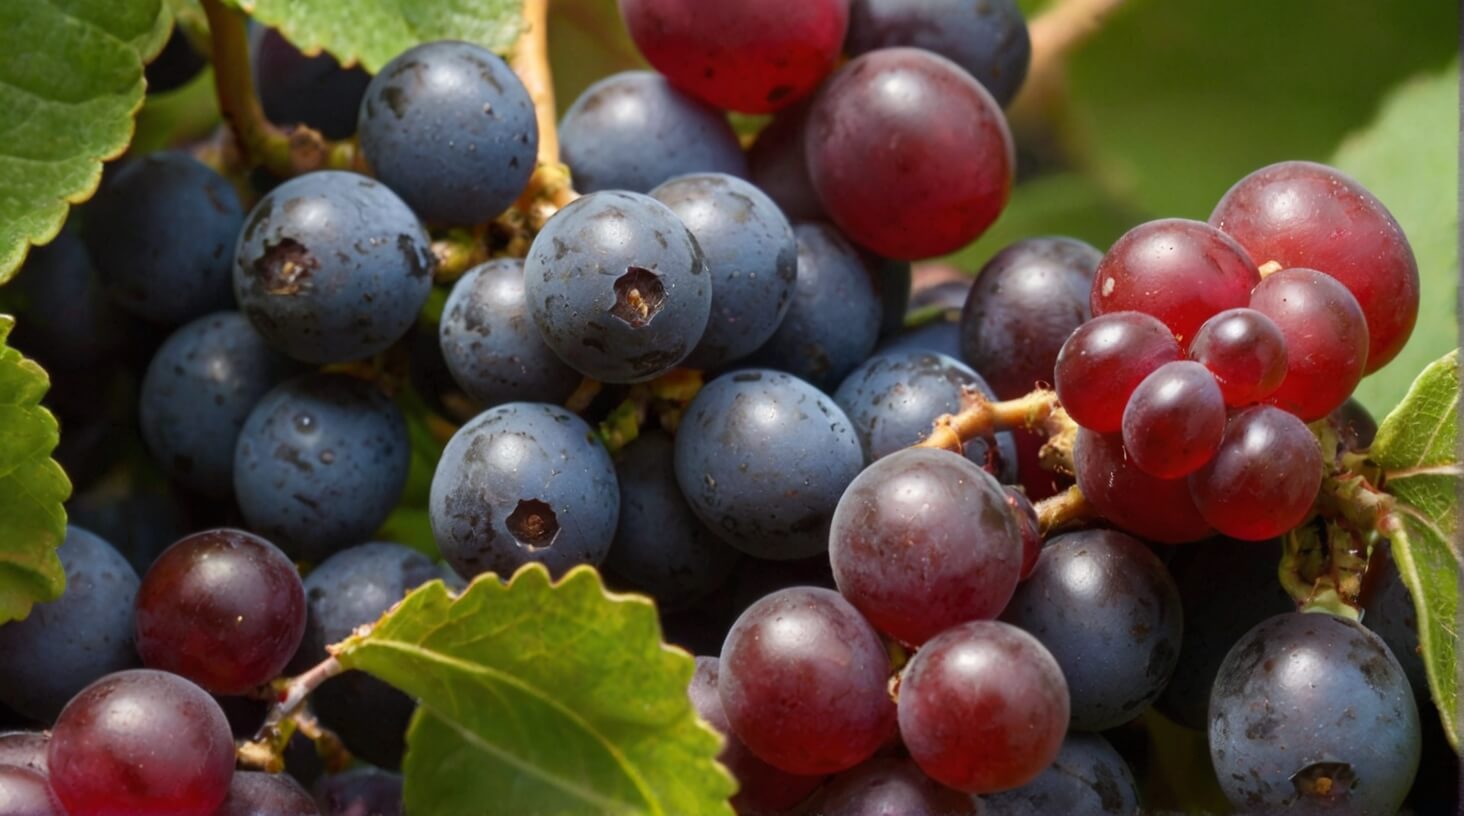 A close-up image of red grapes, which are a natural source of resveratrol, a compound found in certain plants and foods.